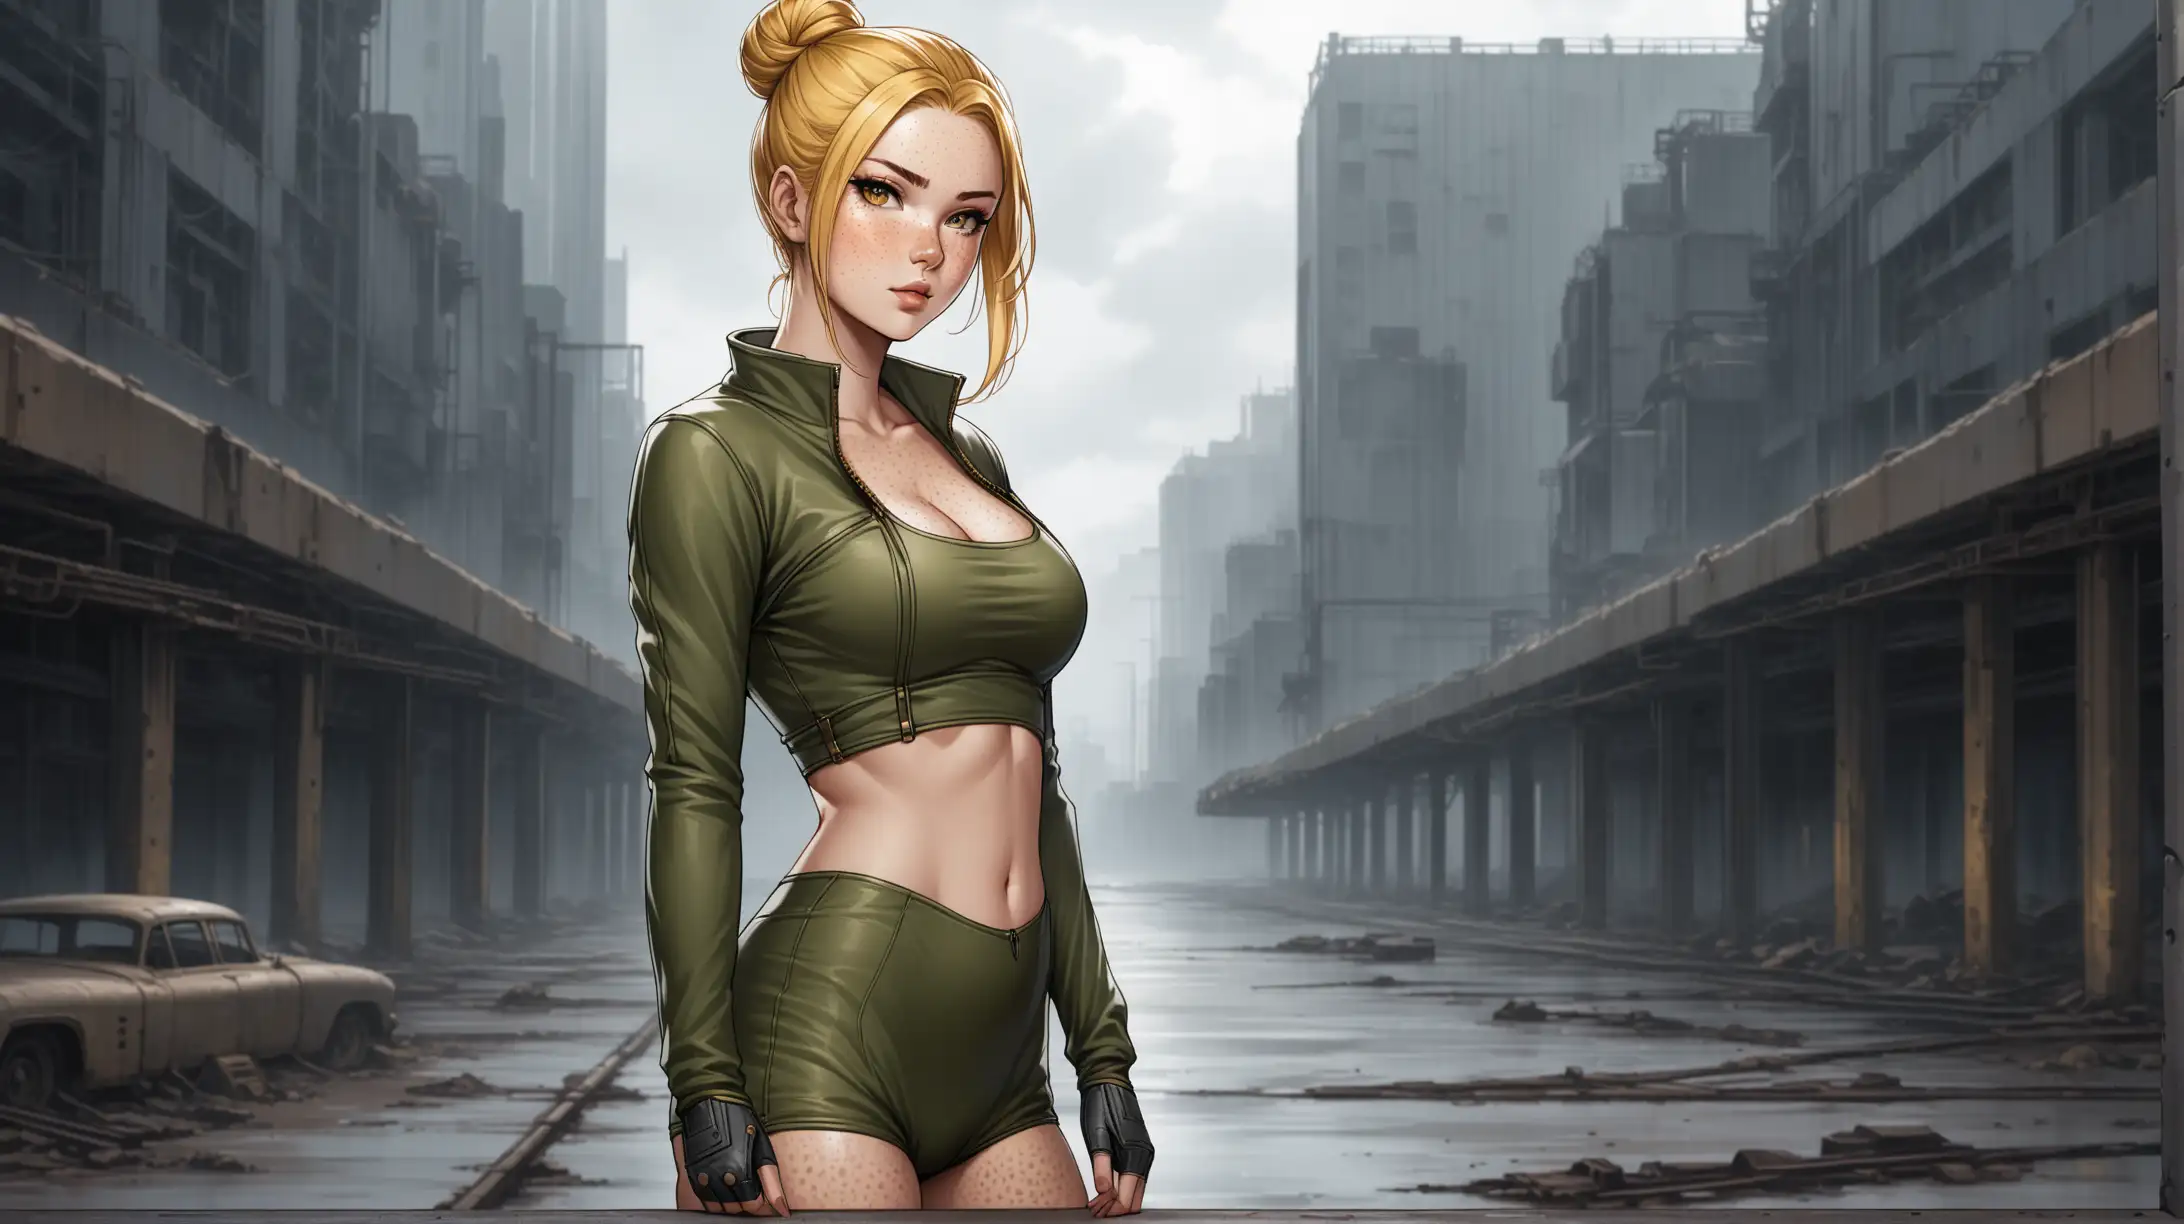 Draw a woman, long blonde hair in a bun, gold eyes, freckles, perky figure, outfit inspired from the Fallout series, high quality, long shot, outdoors, urban setting, seductive pose, natural lighting, overcast, loving gaze toward the viewer